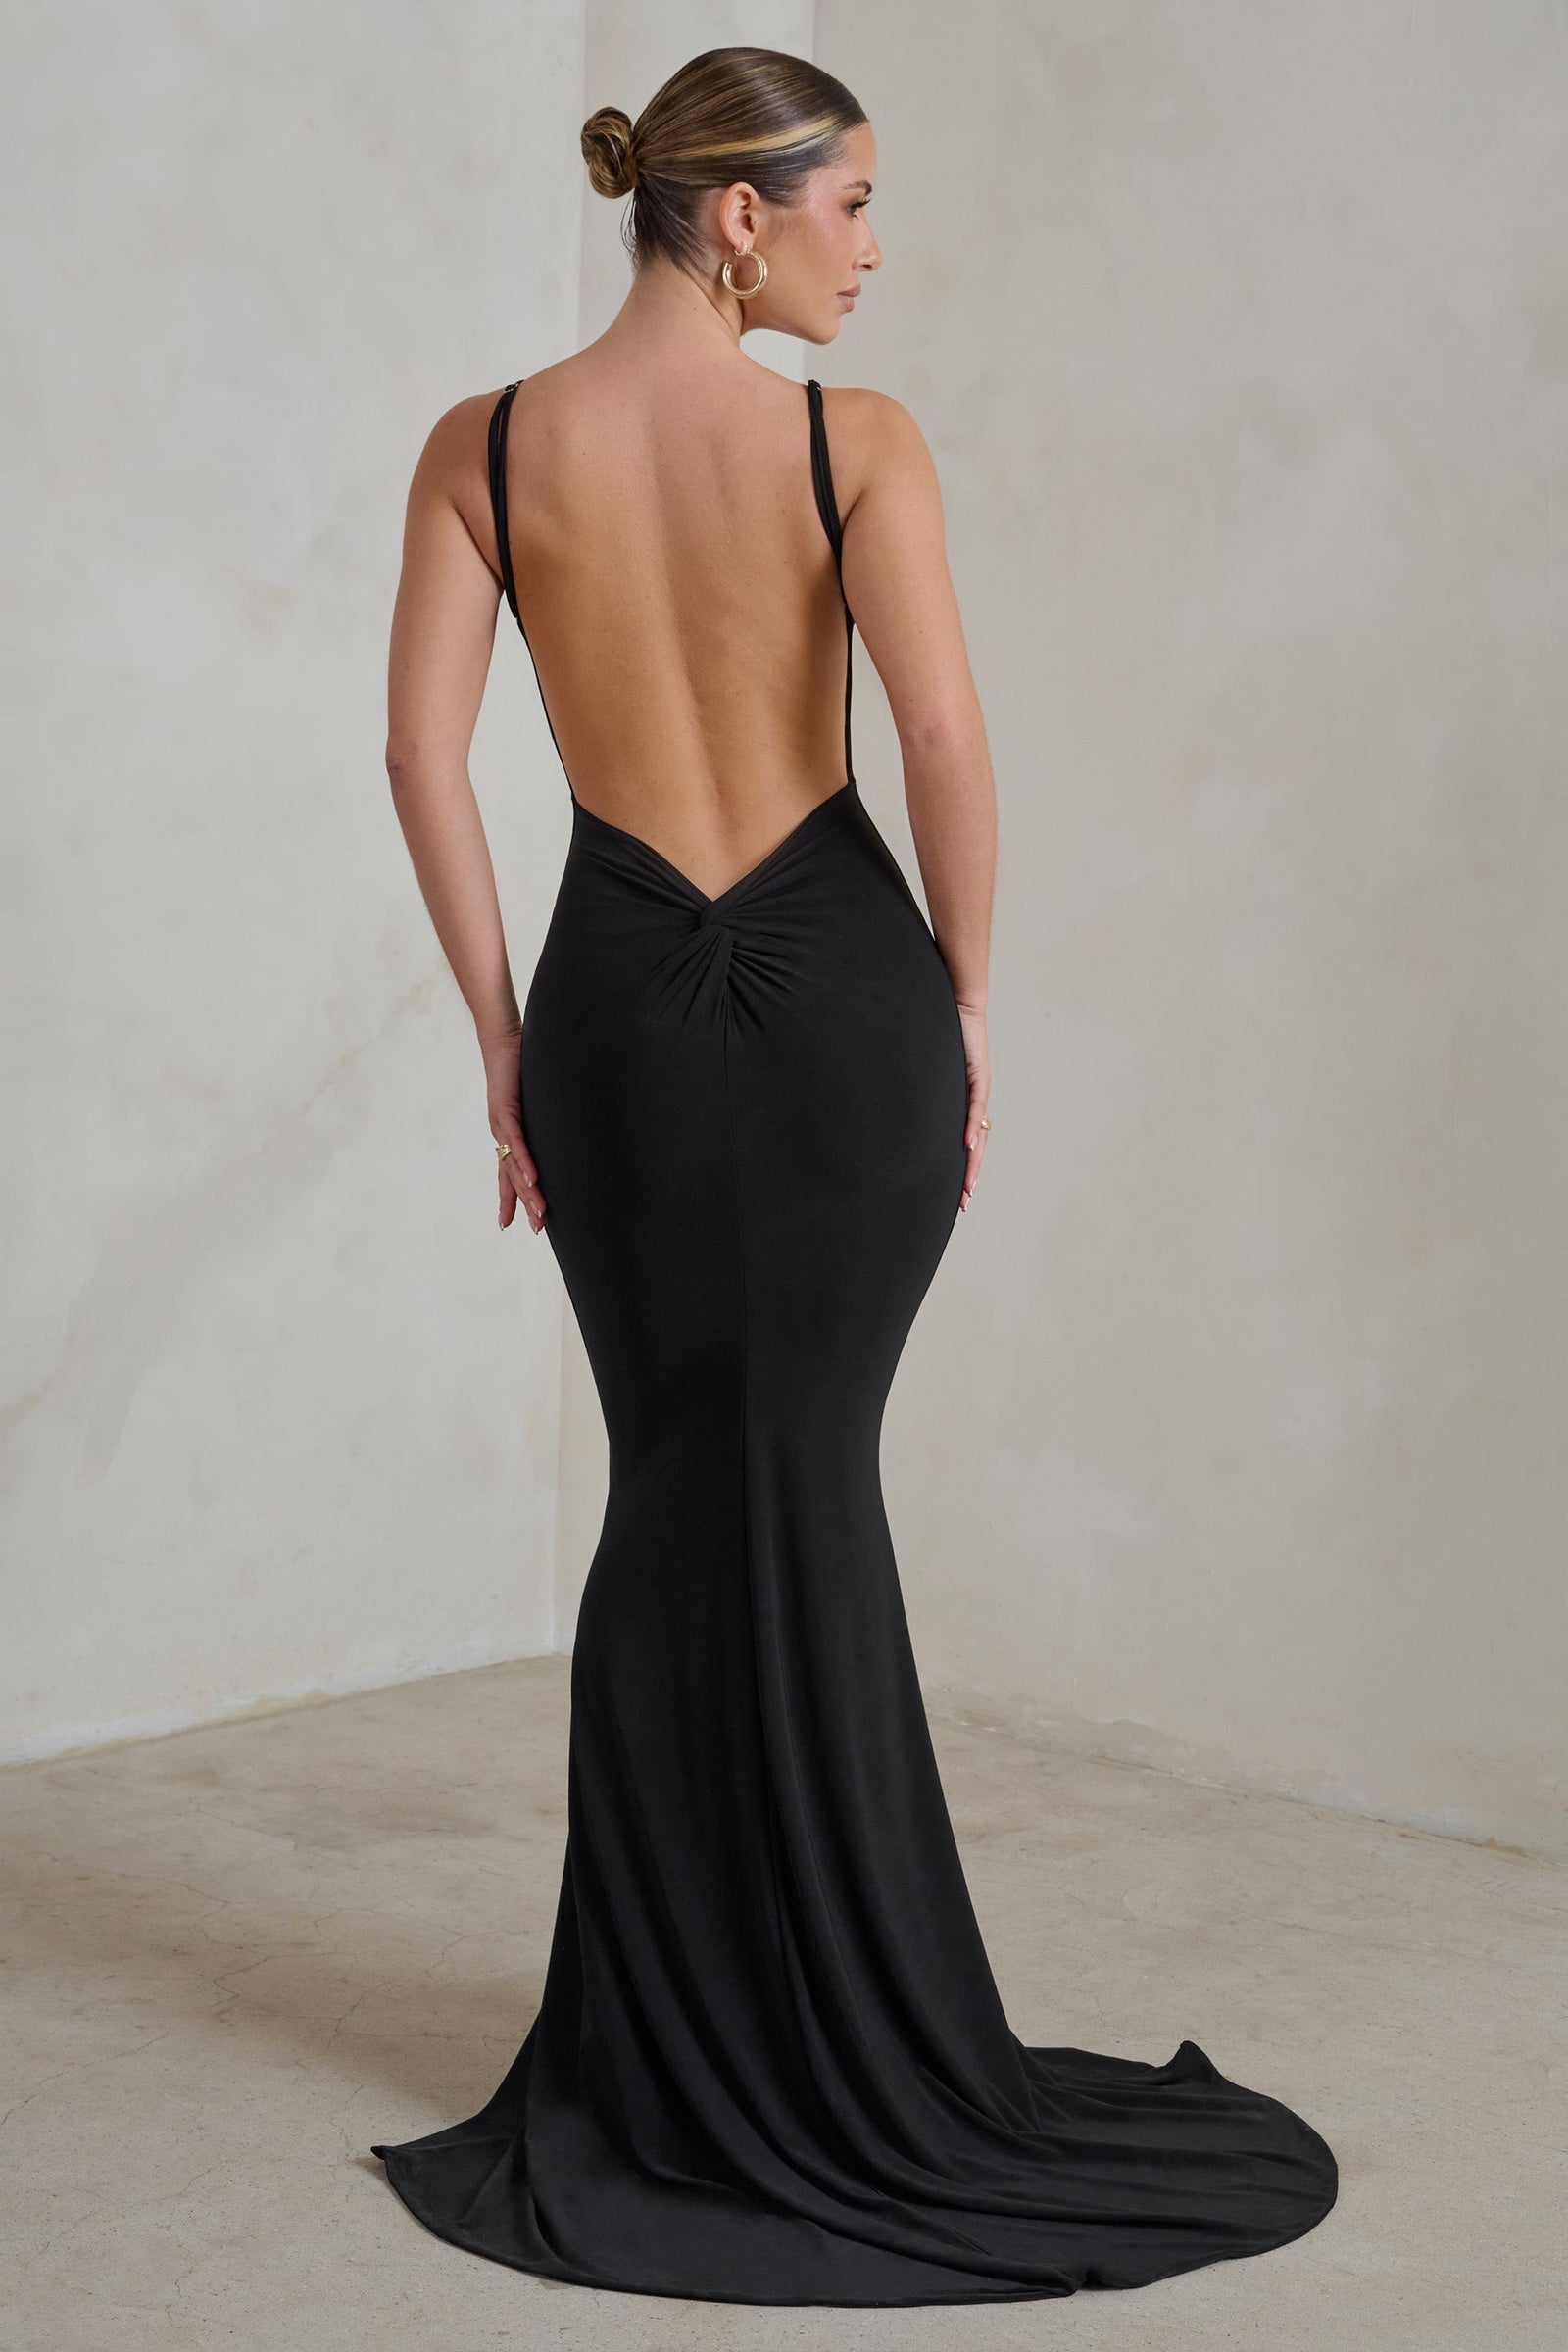 Jourdan Dunn Wore a Backless Dress to the Mobos